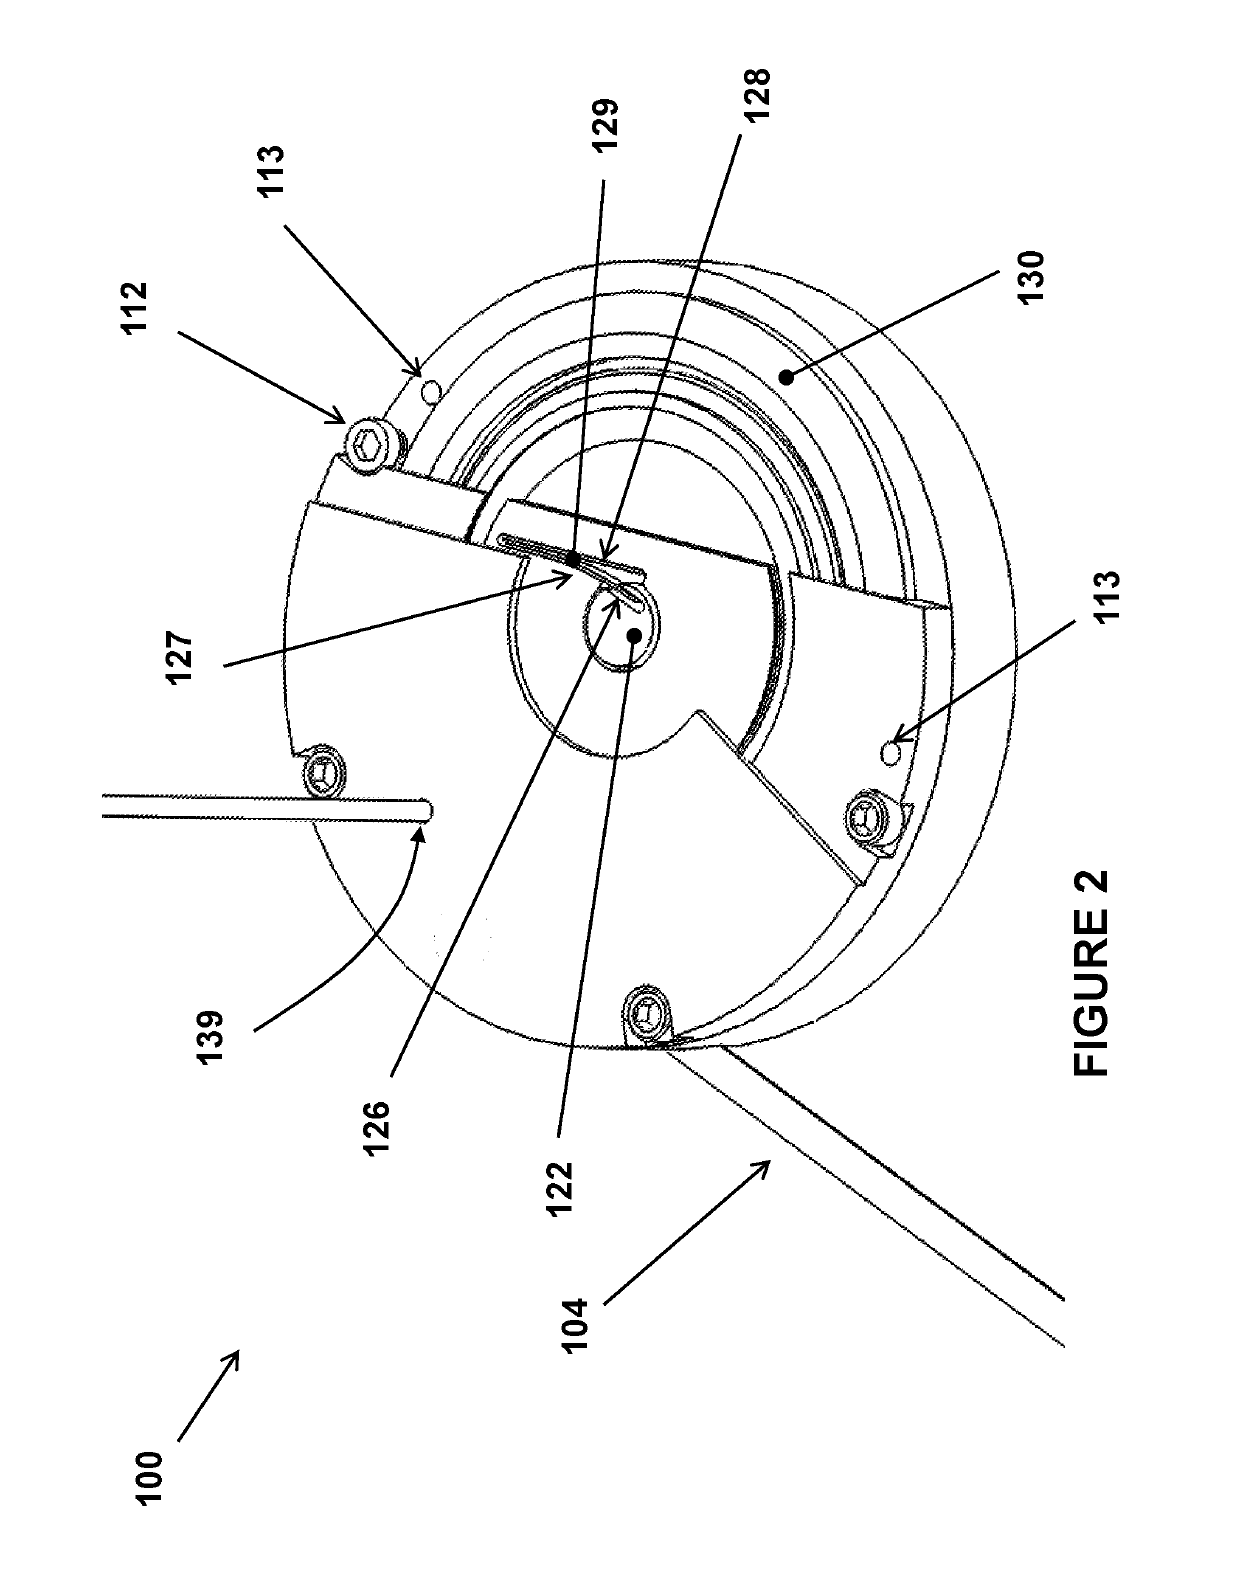 Integrated event detection and electrical generator devices for a gravity dropped or ejected weapons